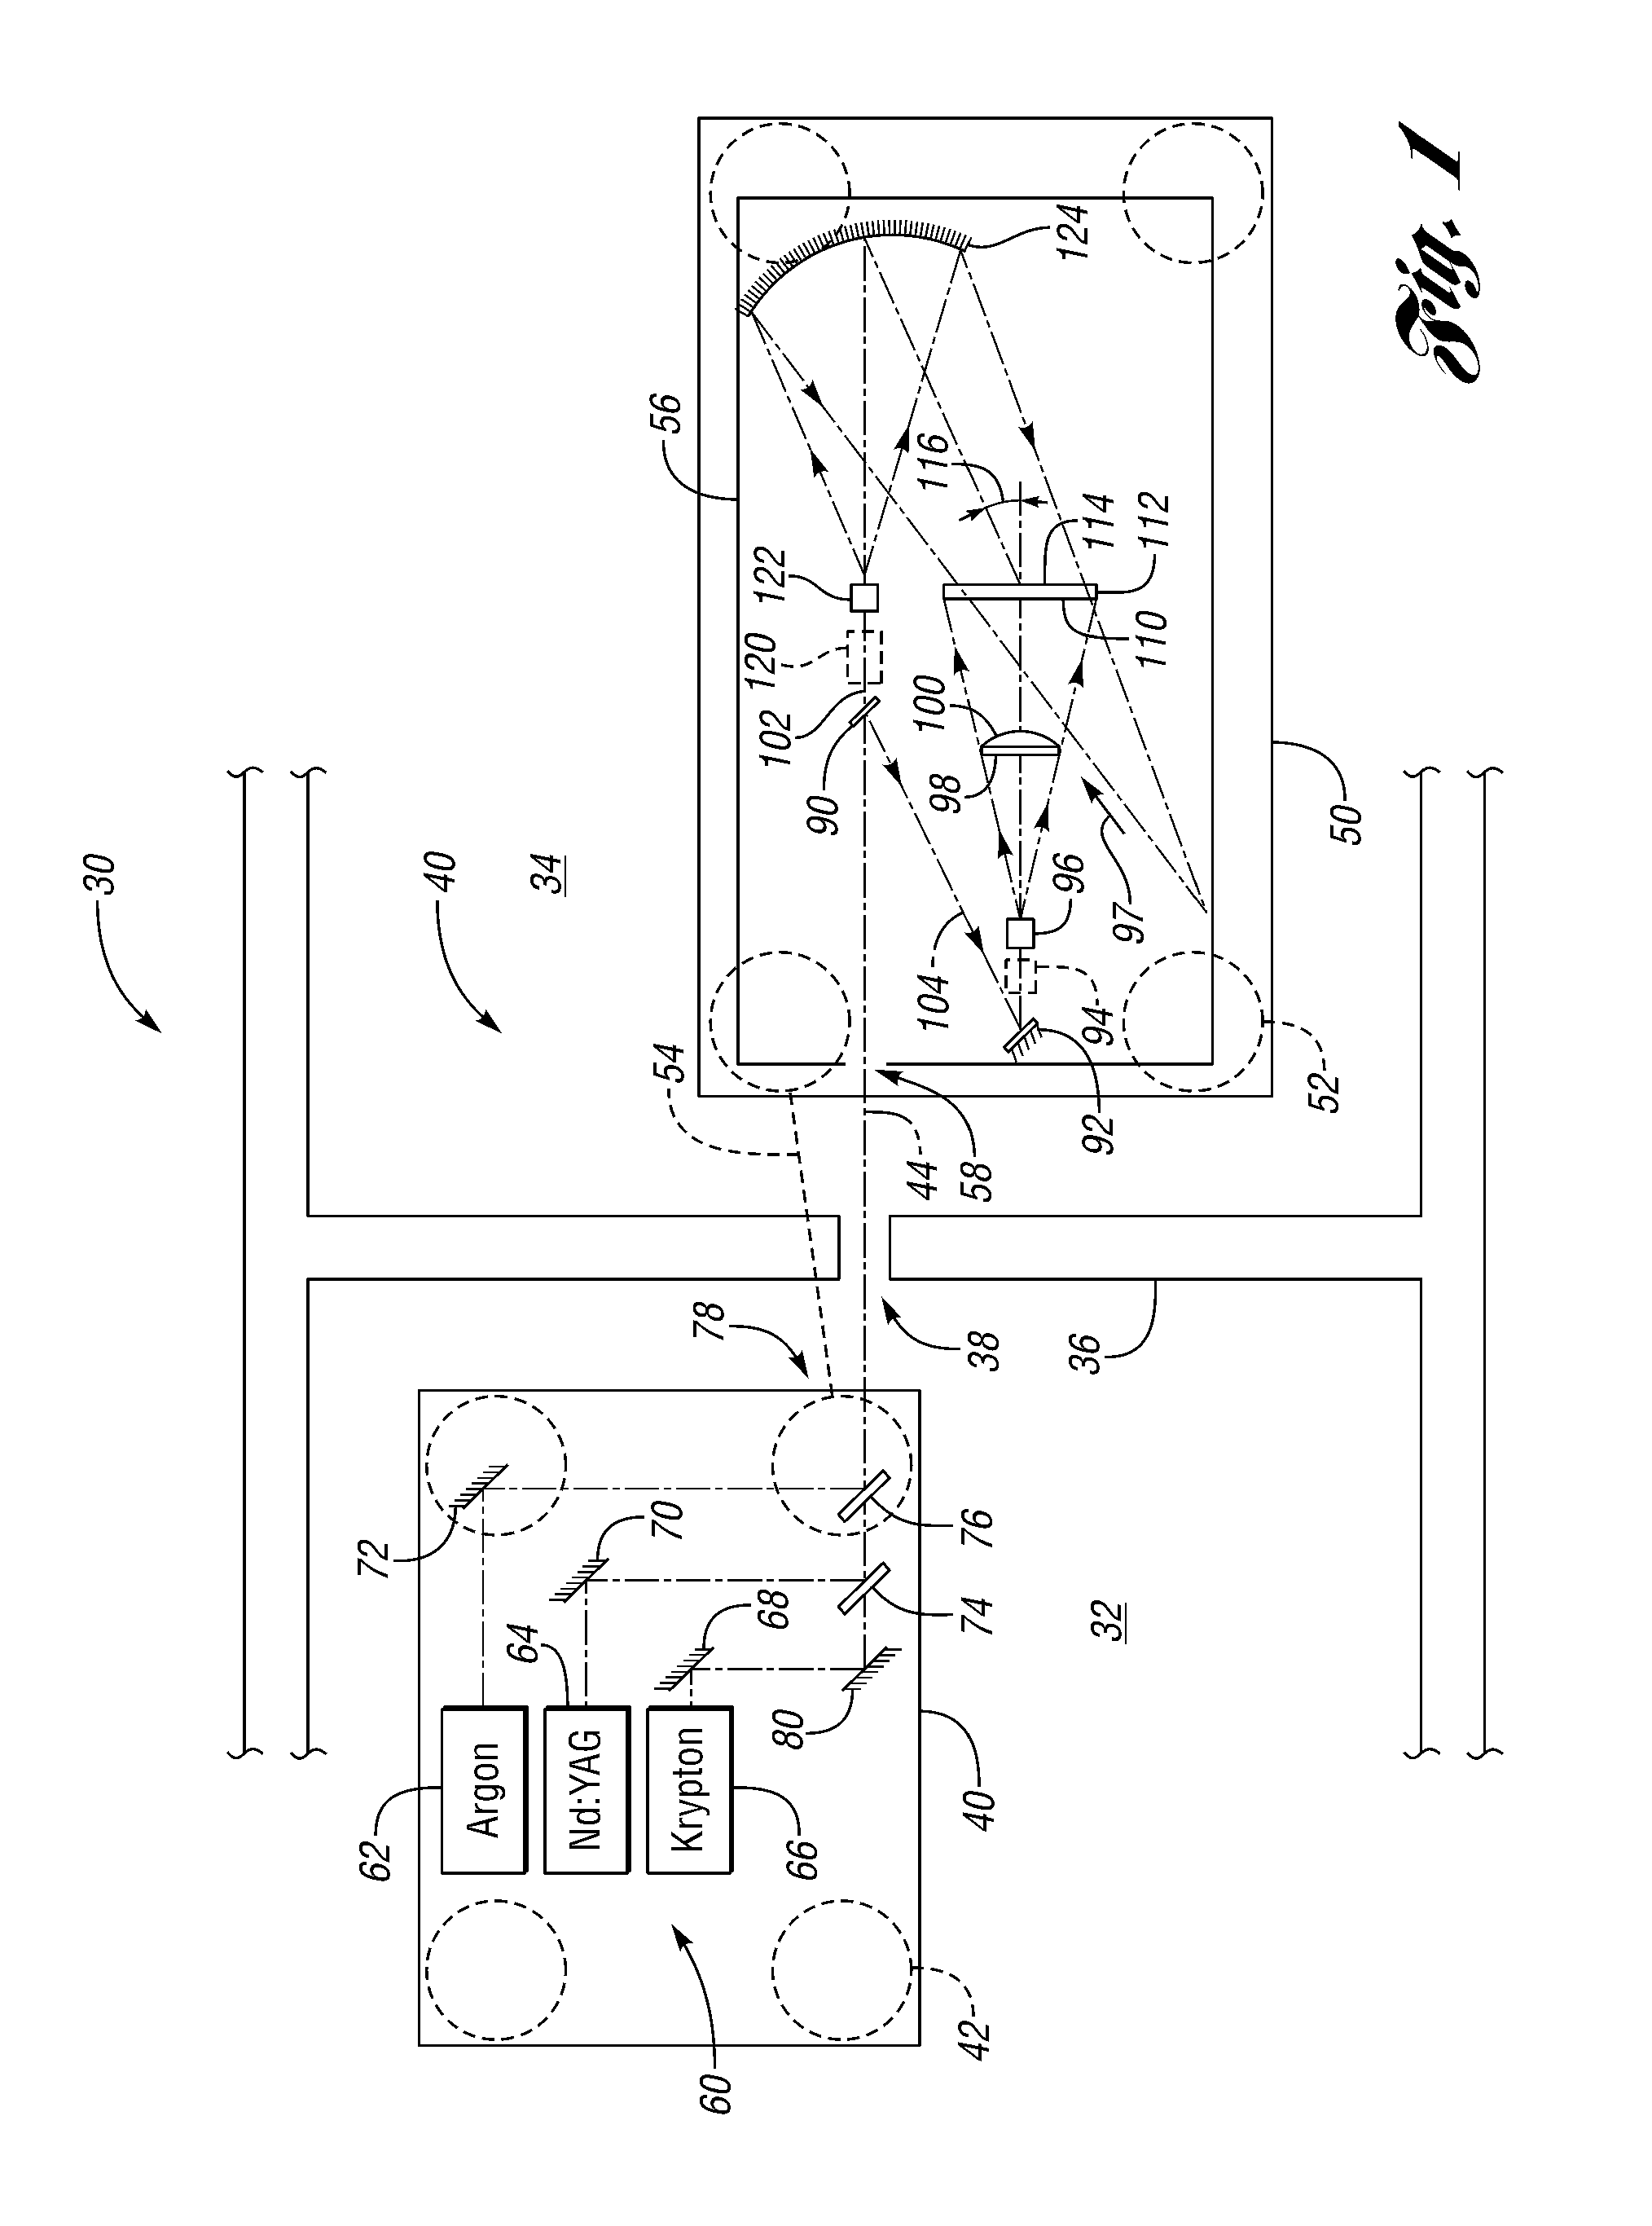 System and method for autostereoscopic imaging using holographic optical element